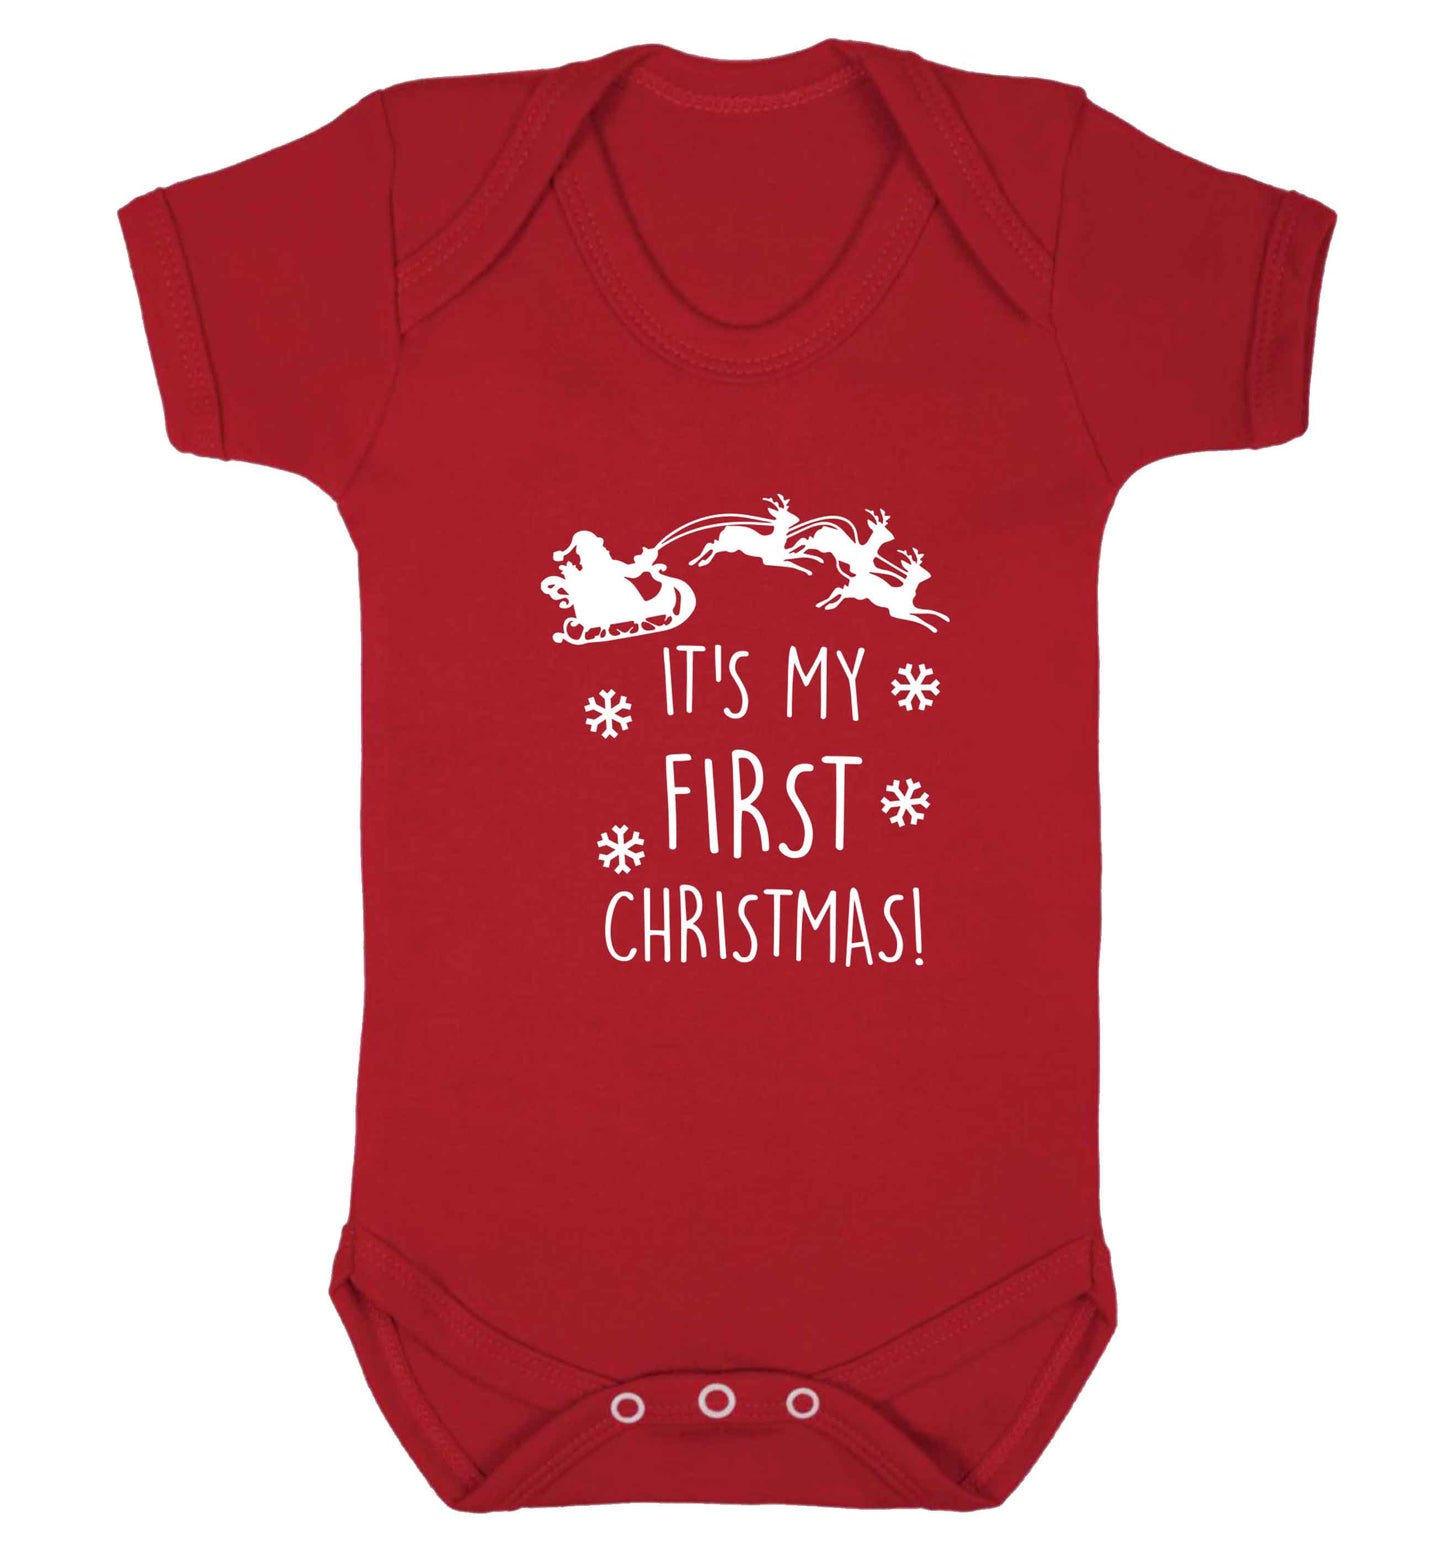 It's my first Christmas - Santa sleigh text baby vest red 18-24 months